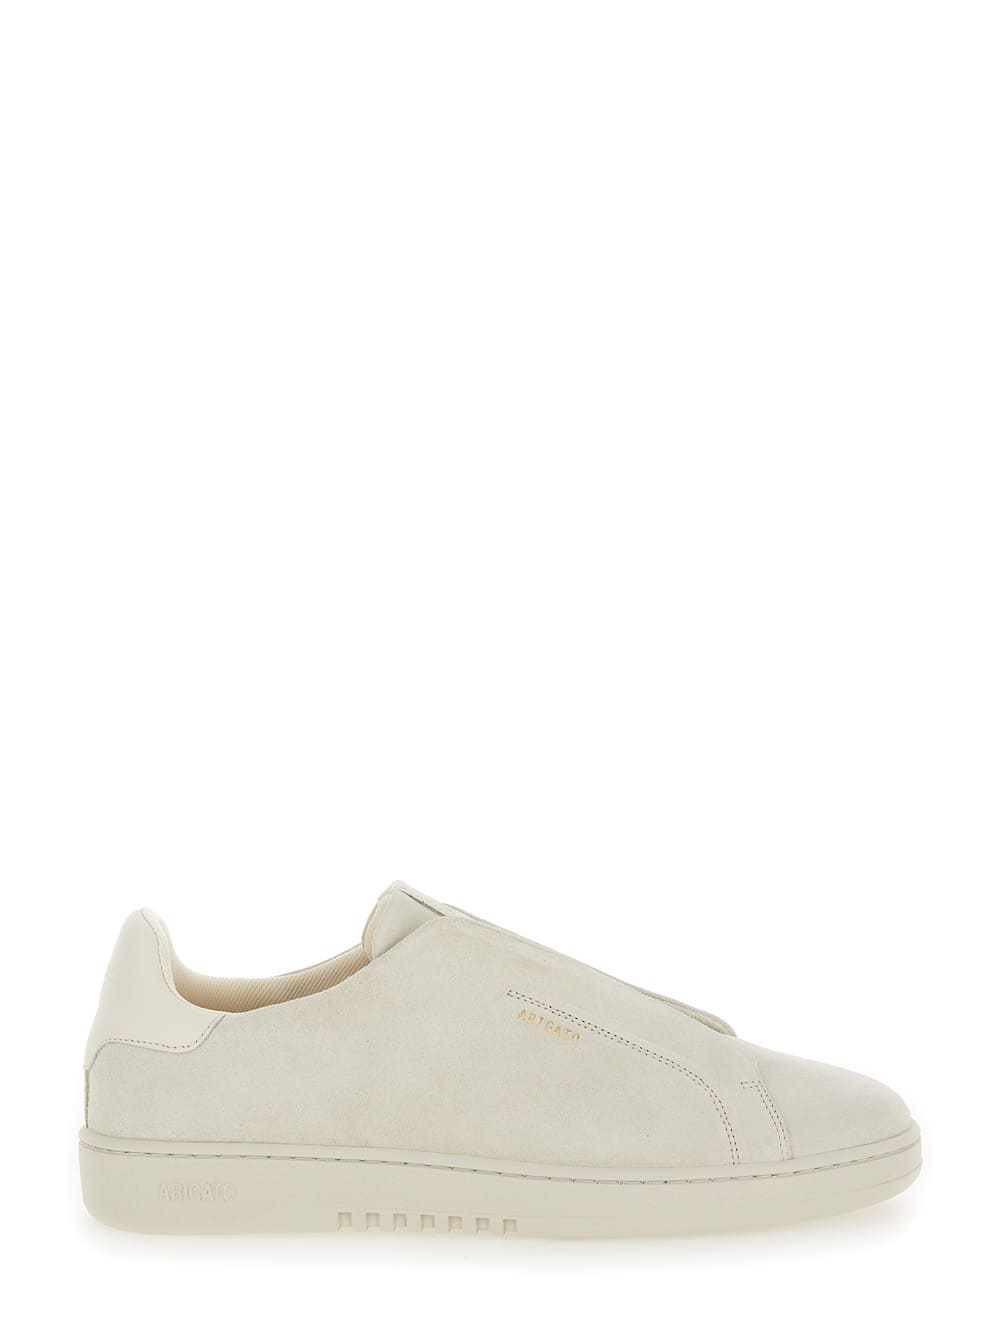 Axel Arigato Dice Laceless White Low Top Slip-on Sneakers In Suede Man